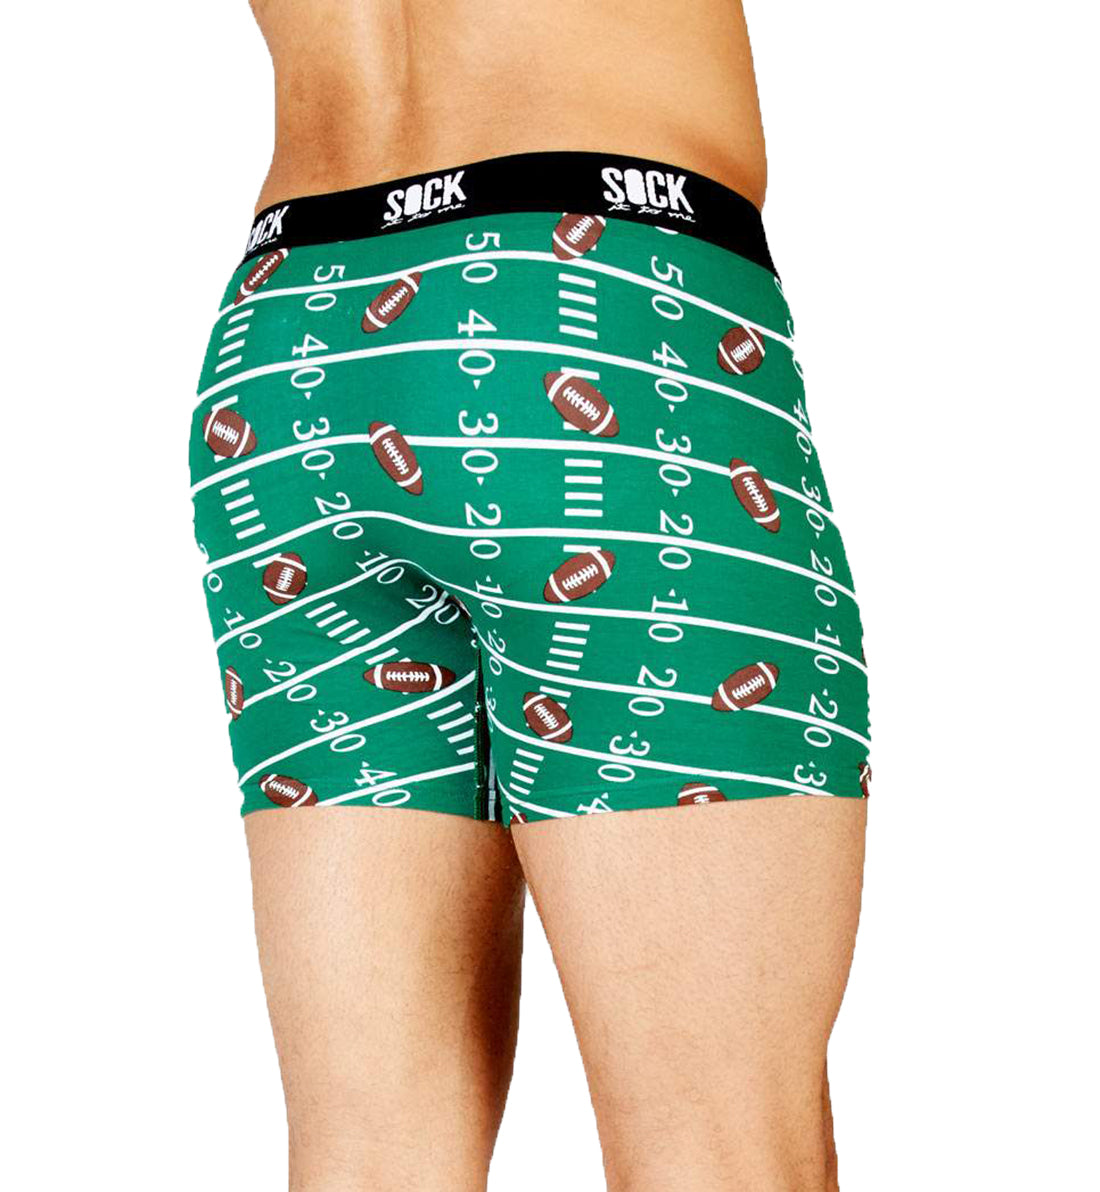 SOCK it to me Men's Boxer Brief (umb036),Small,Touchdown - Touchdown,Small